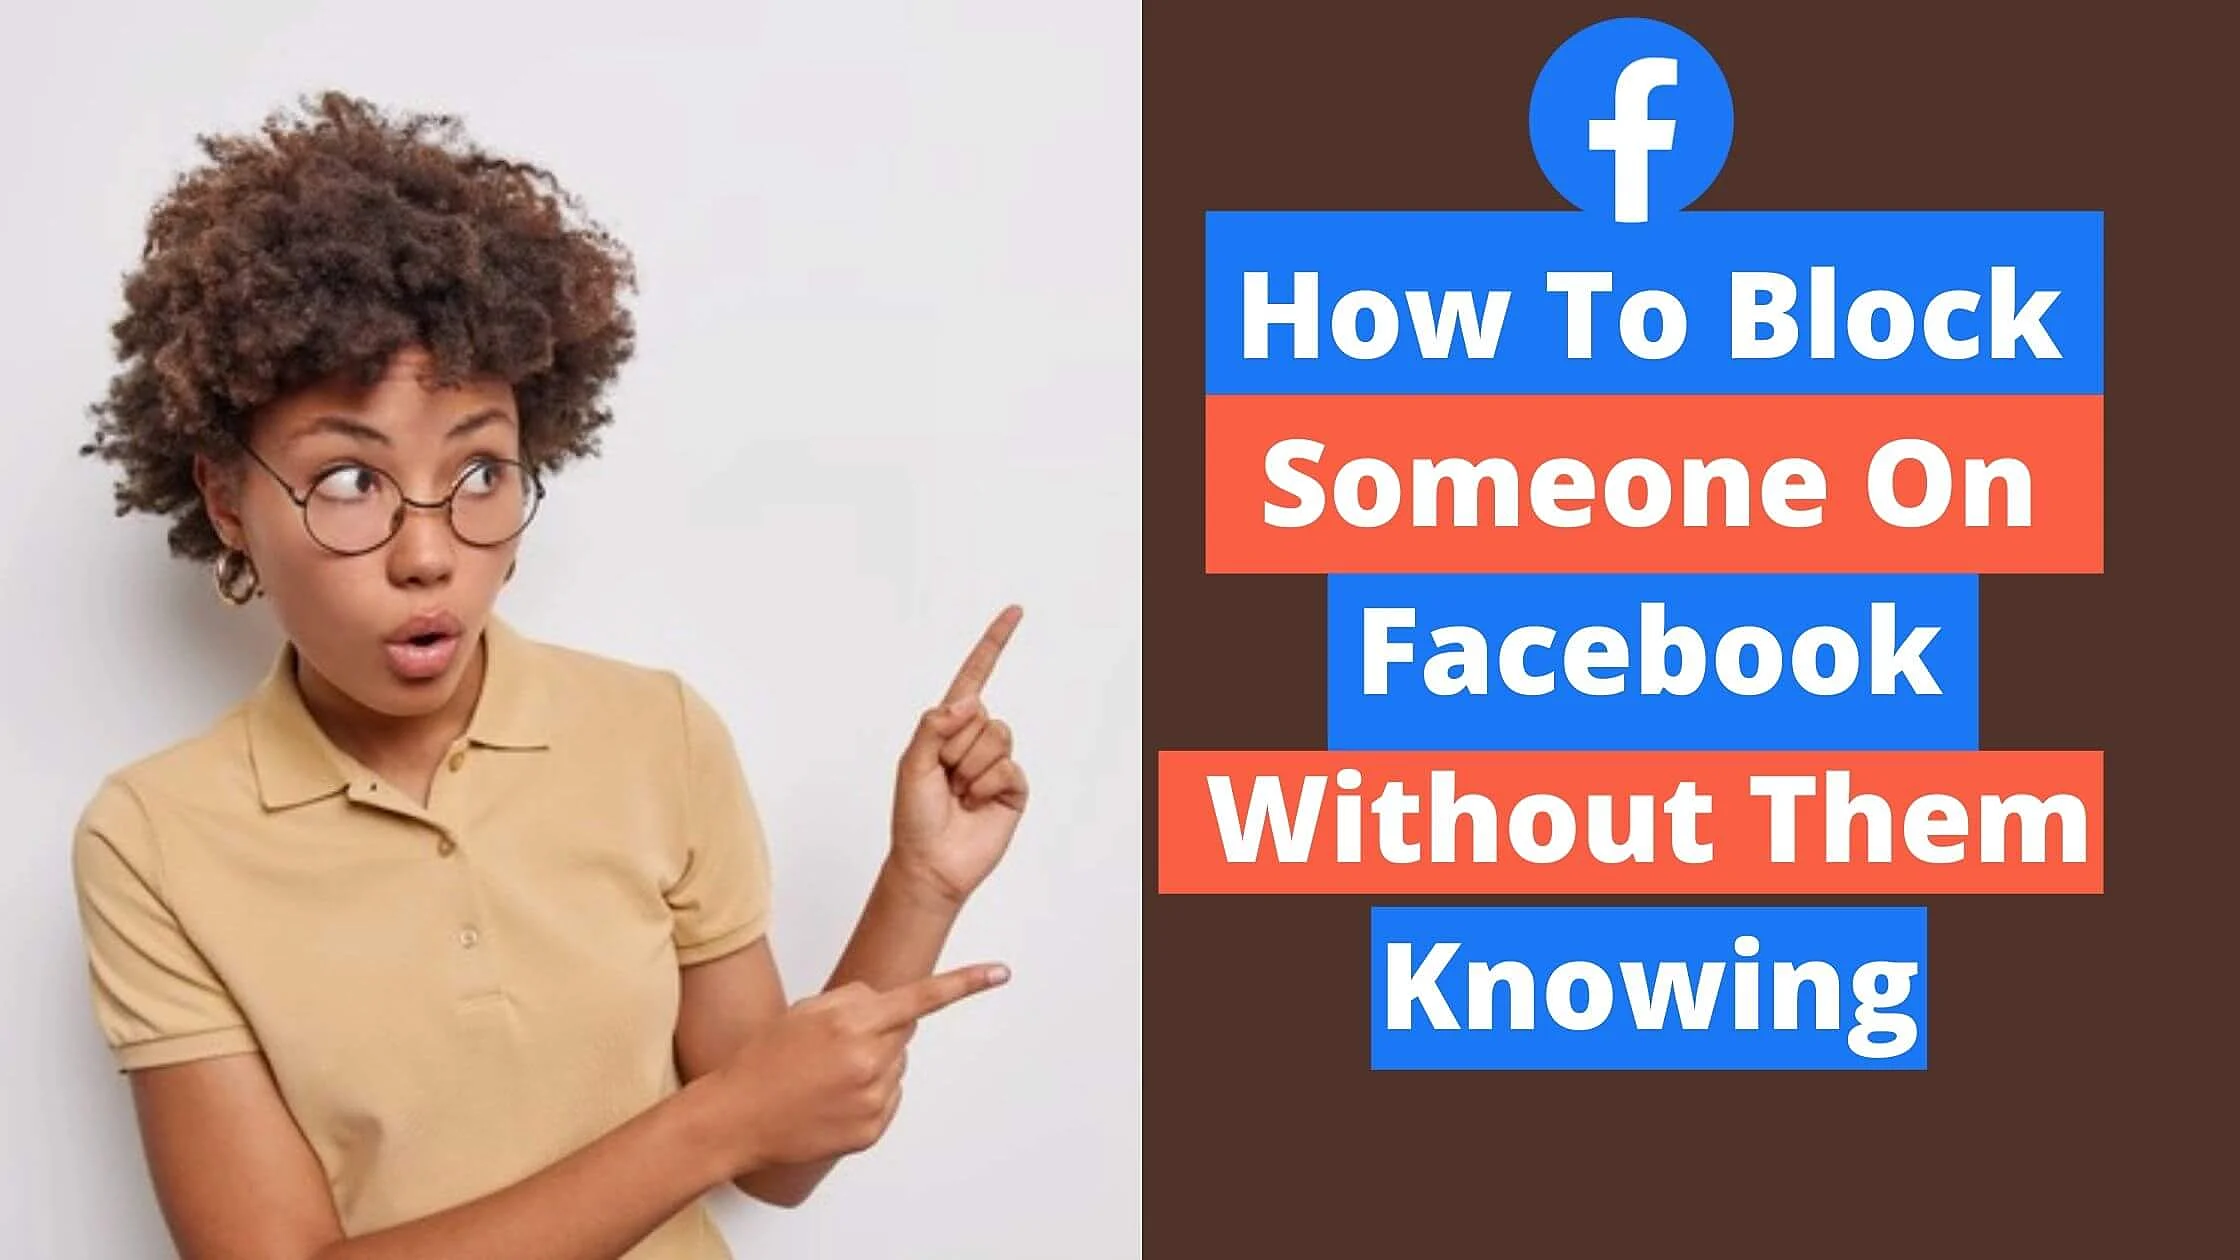 How To Block Someone On Facebook Without Them Knowing